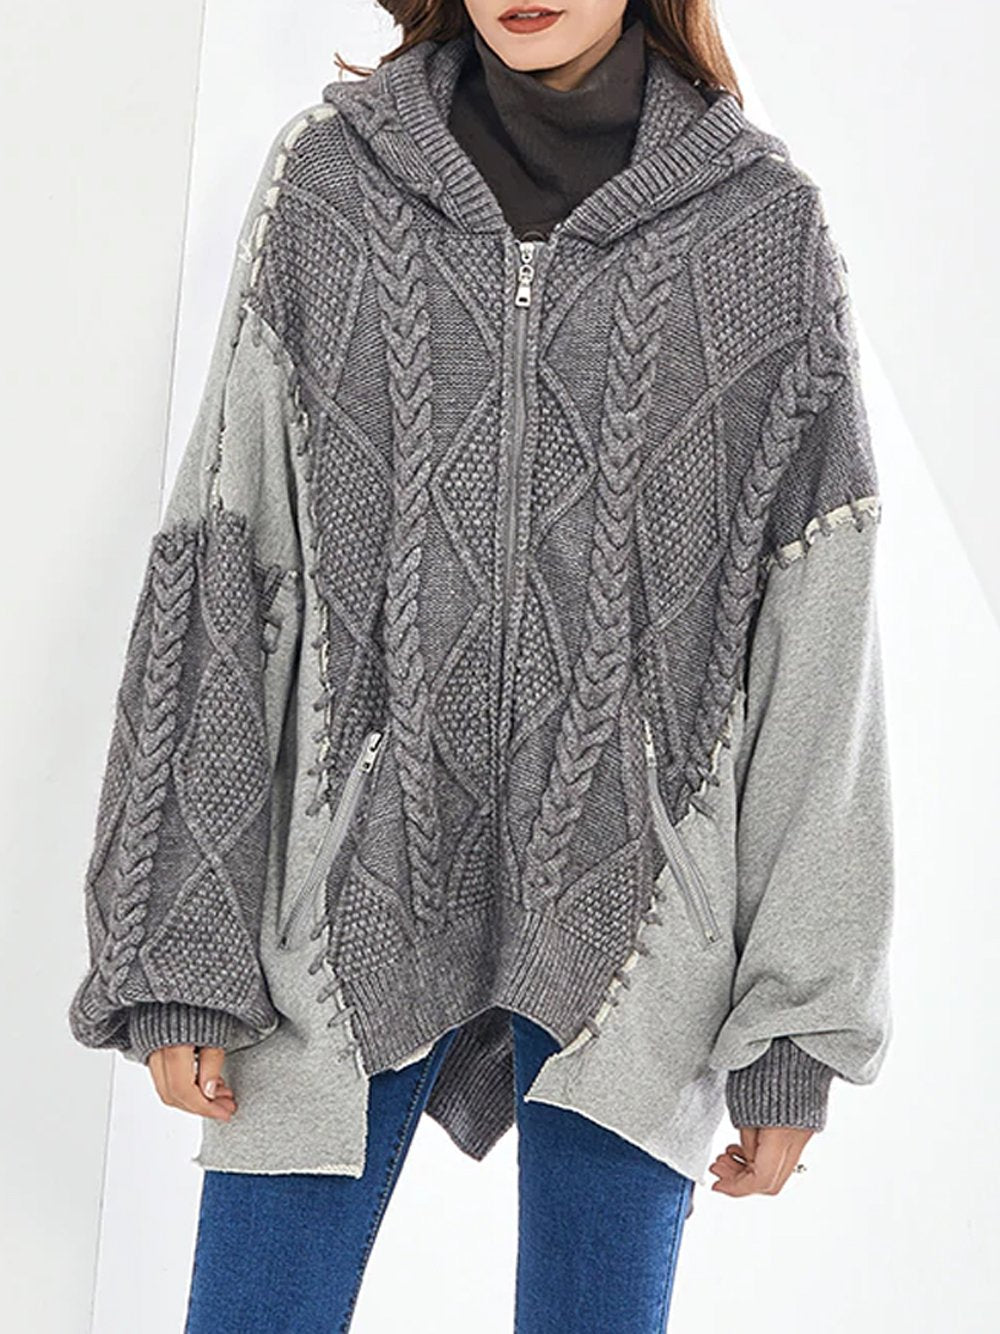 Oversized Cable Knitted Cardigan